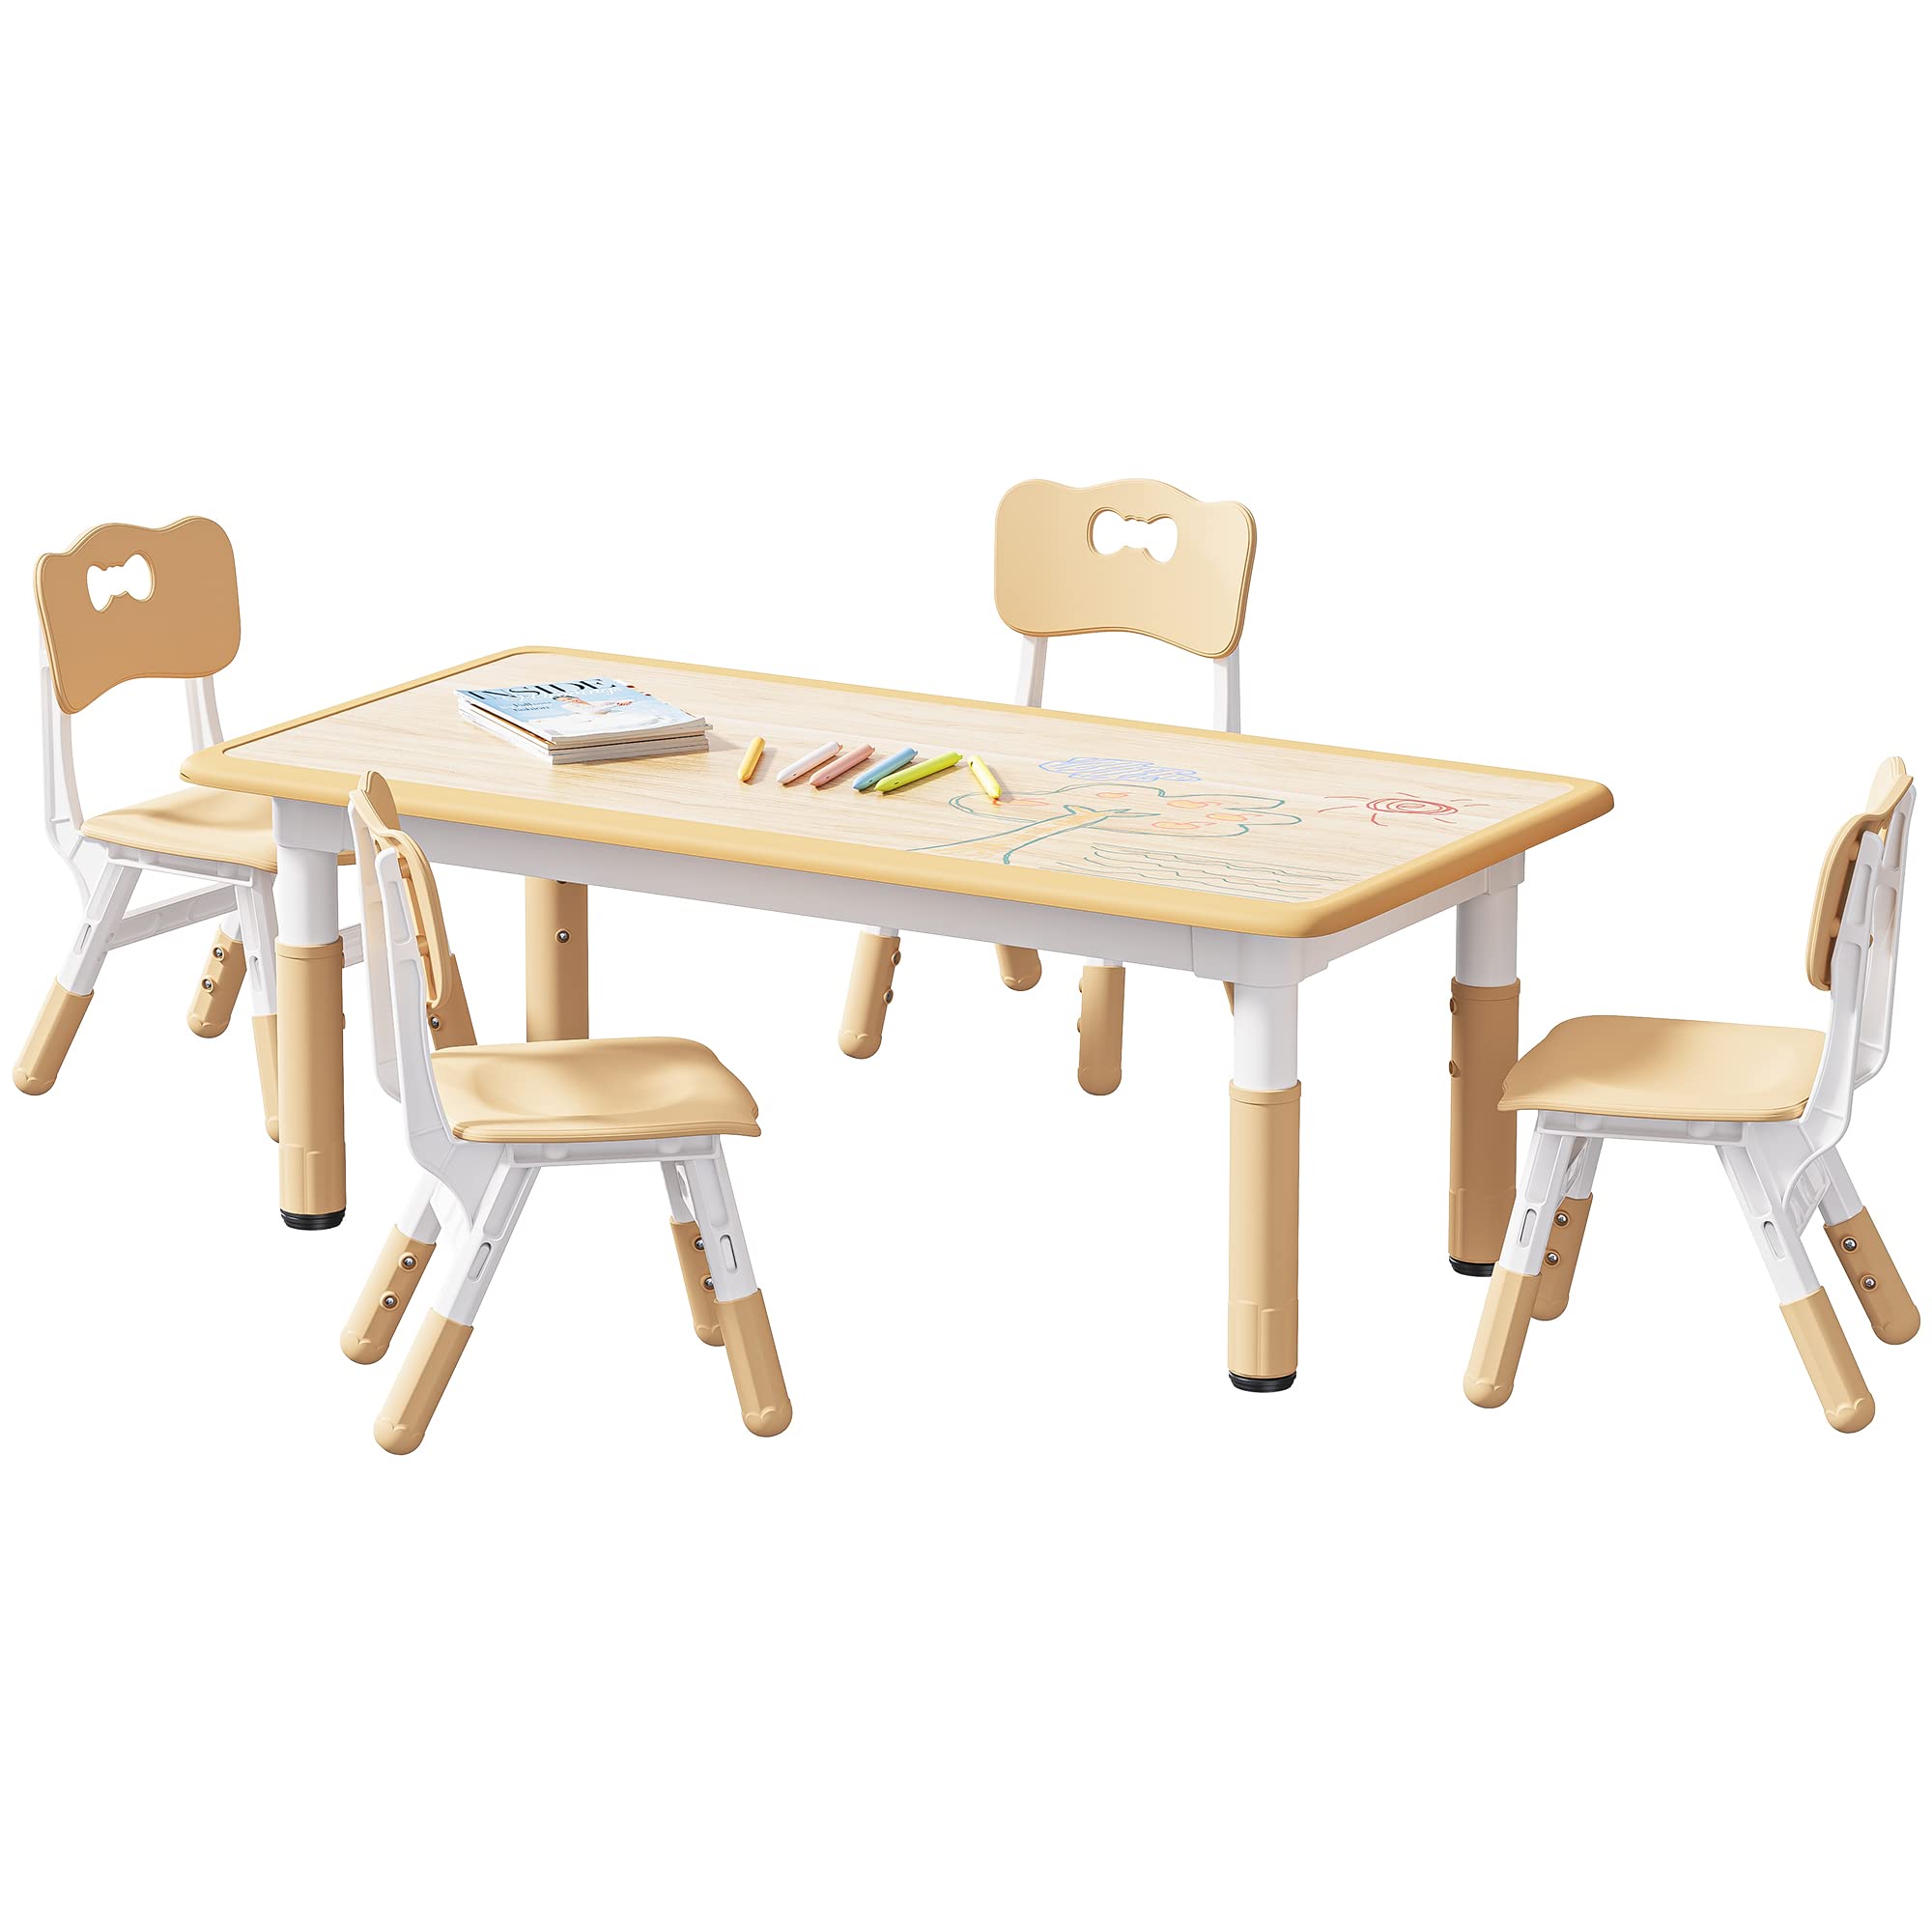 Brelley Kids Table and 4 Chairs Set, Height Adjustable Toddler Table and Chair Set, Graffiti Desktop, Non-Slip Legs, Max 300lbs, Children Multi-Activity Table for Ages 2-10